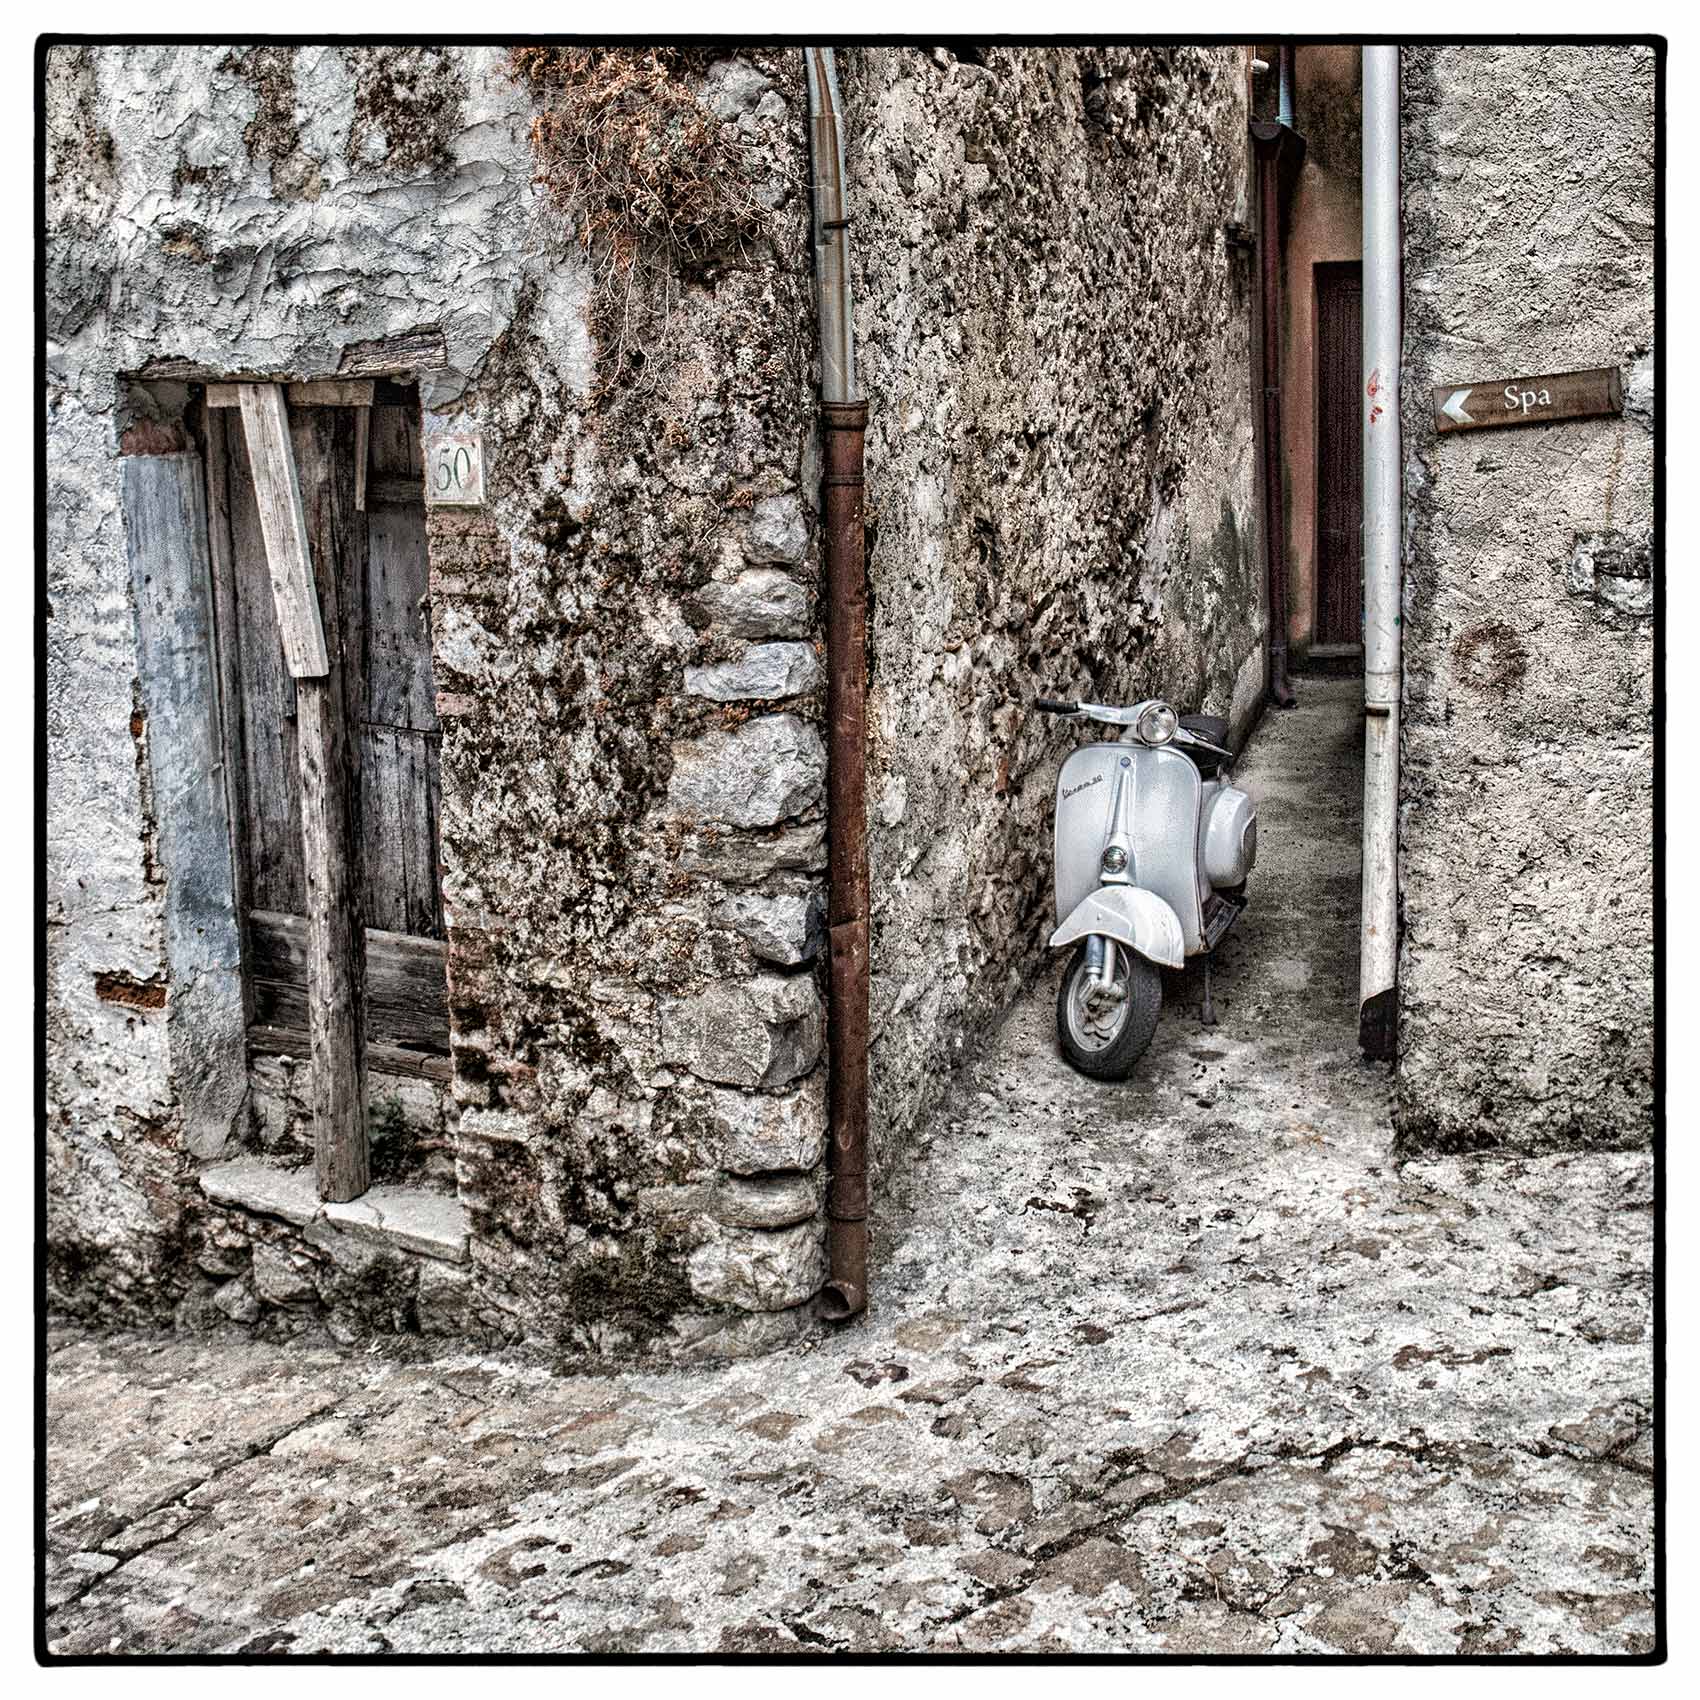 a-vespa-scooter-stands-in-an-alley-way-in-graterri-siciliy-italy